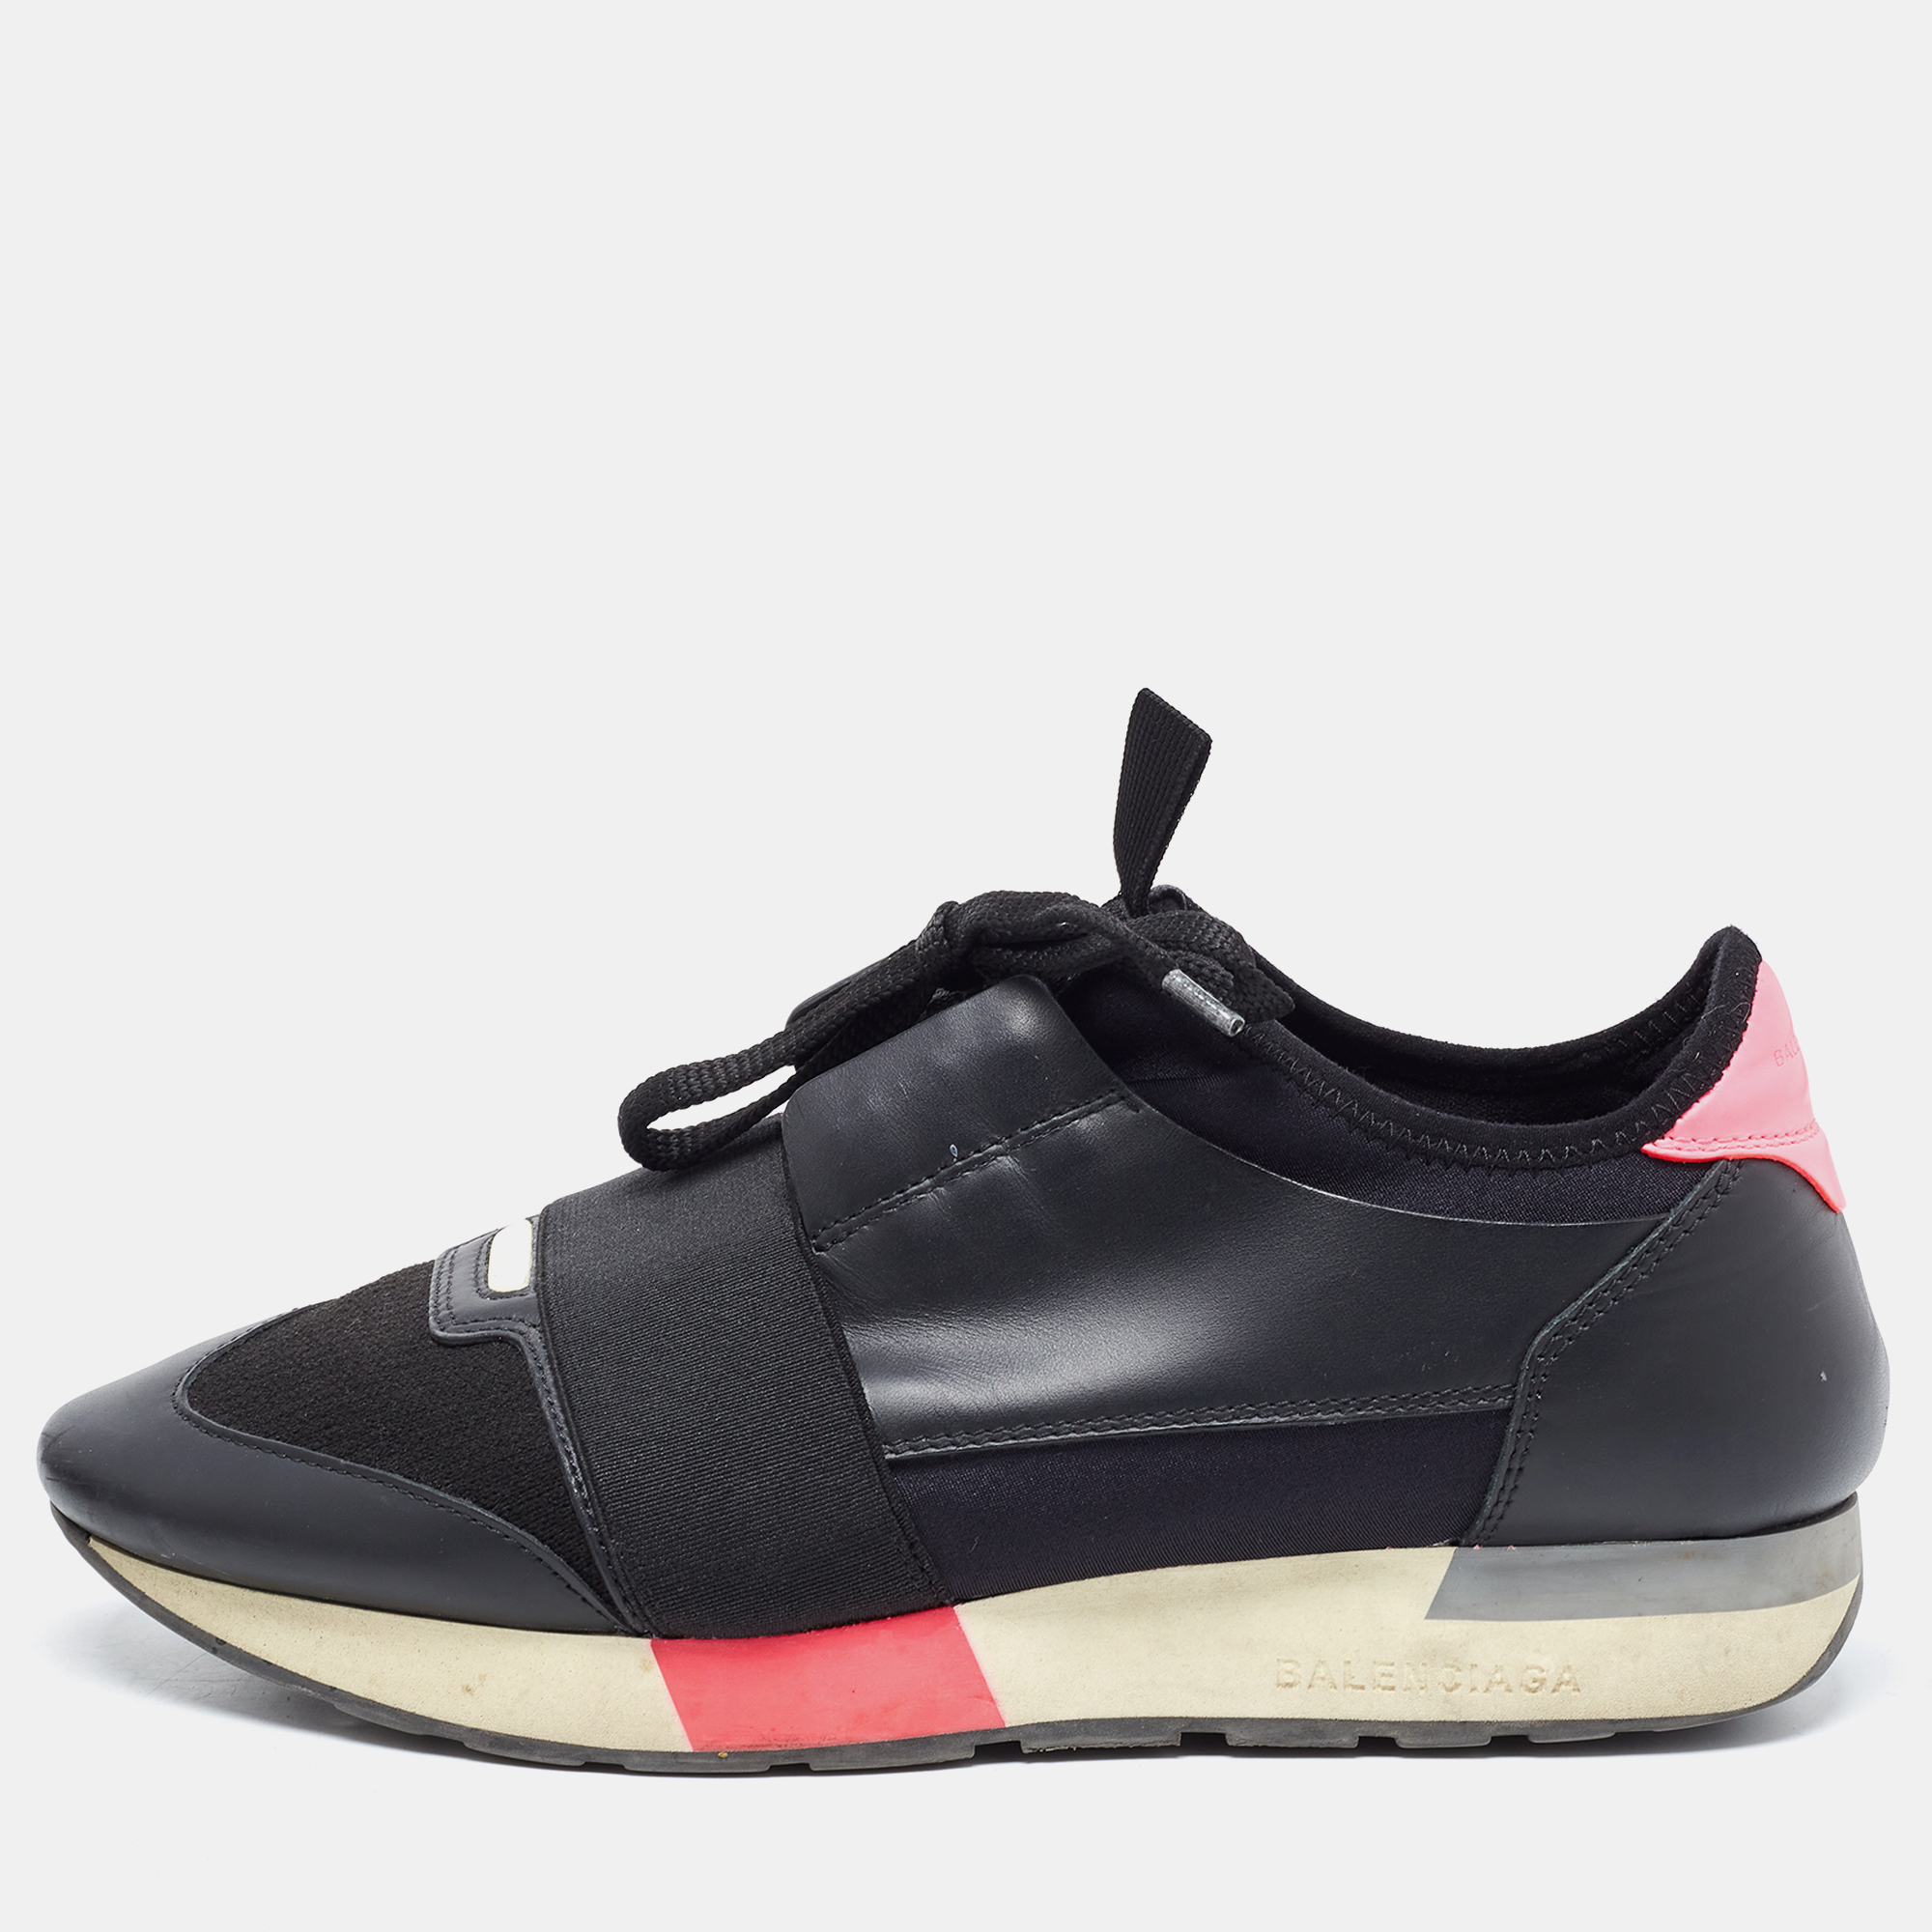 Balenciaga Black/Pink Leather And Fabric Race Runner Sneakers Size 39